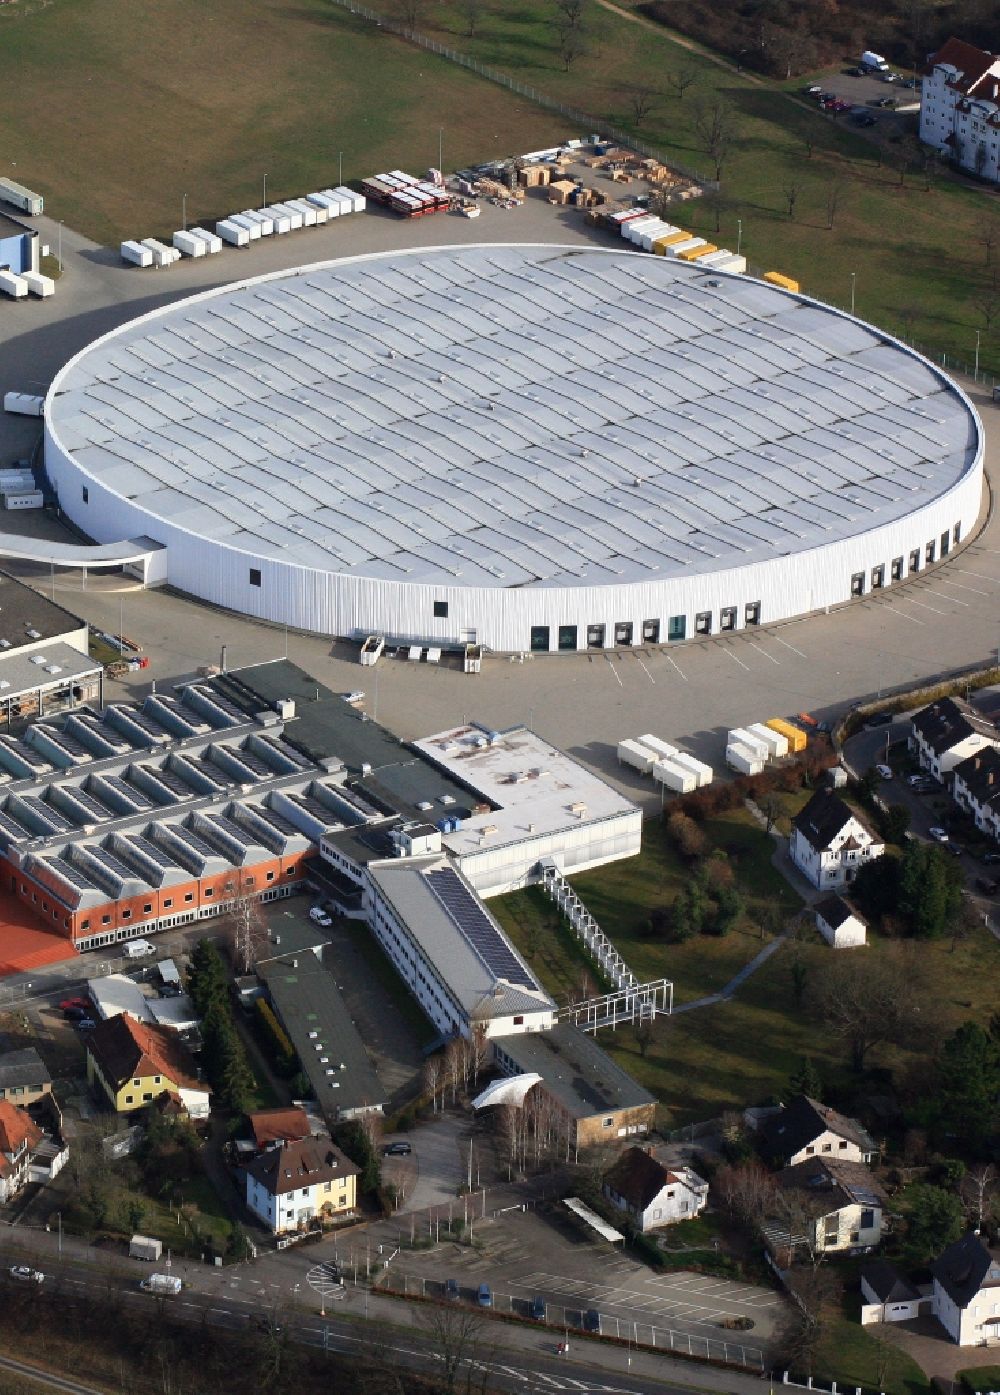 Aerial image Weil am Rhein - Building and production halls on the premises of the furniture manufacturer Vitra in Weil am Rhein in the state of Baden- Wuerttemberg form a unique ensemble of contemporary architecture. The buildings of many renowned architects lure design and architecture lovers and students in the city on the border triangle near Basel